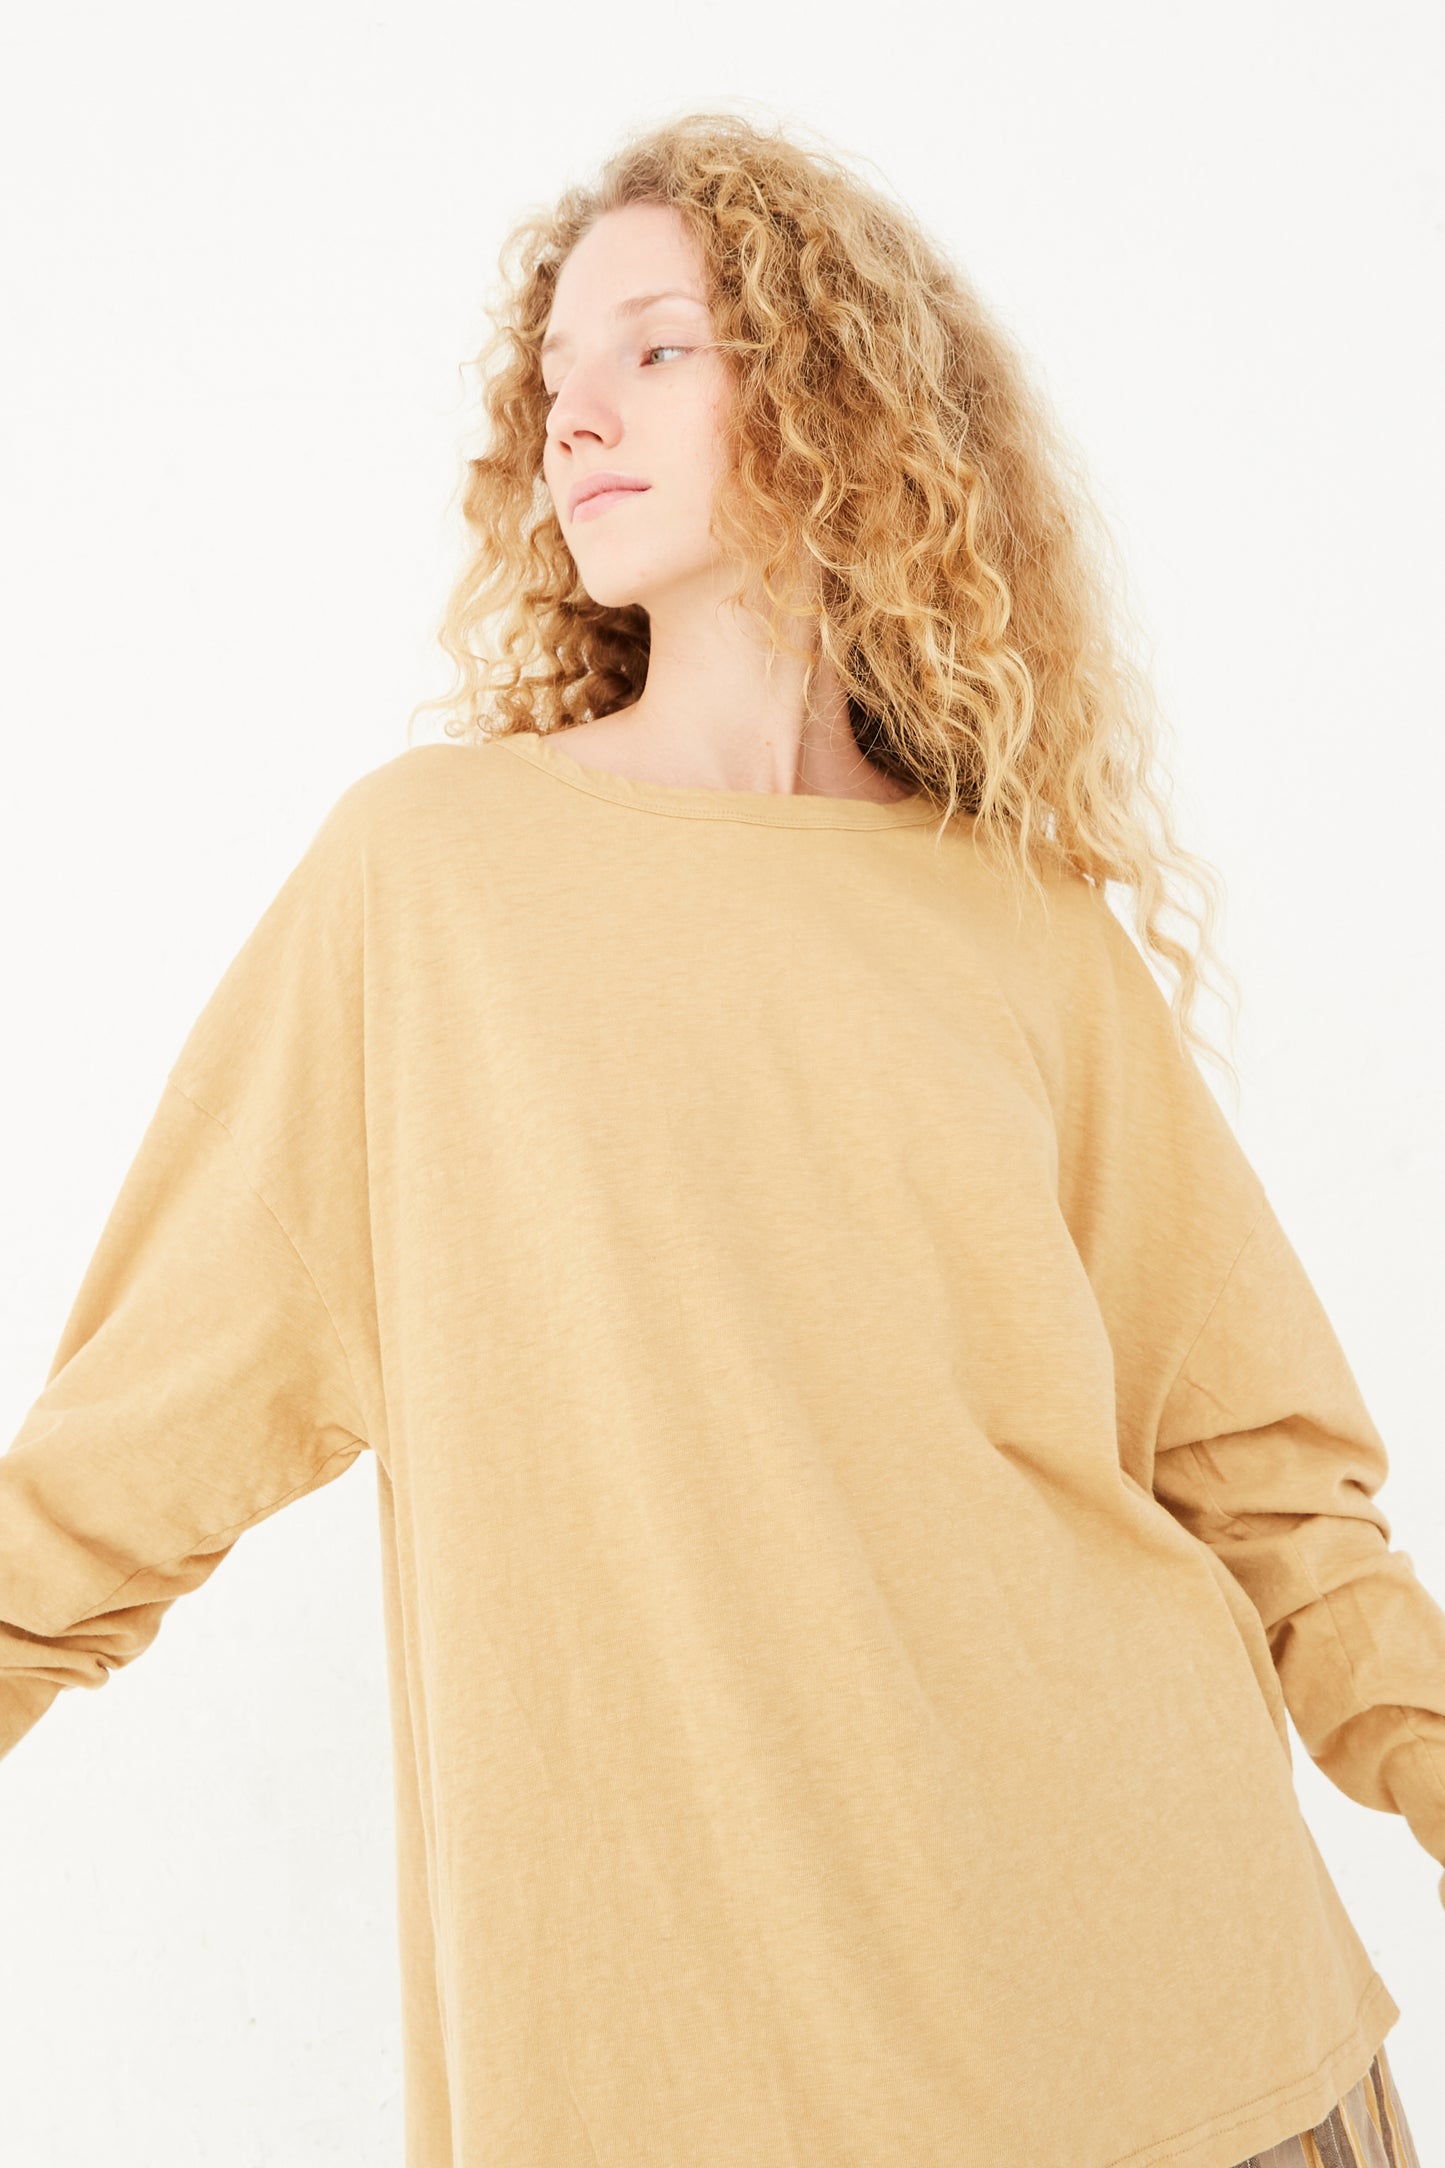 The model is wearing an Ichi Antiquités Cotton Loose Pullover in Camel.